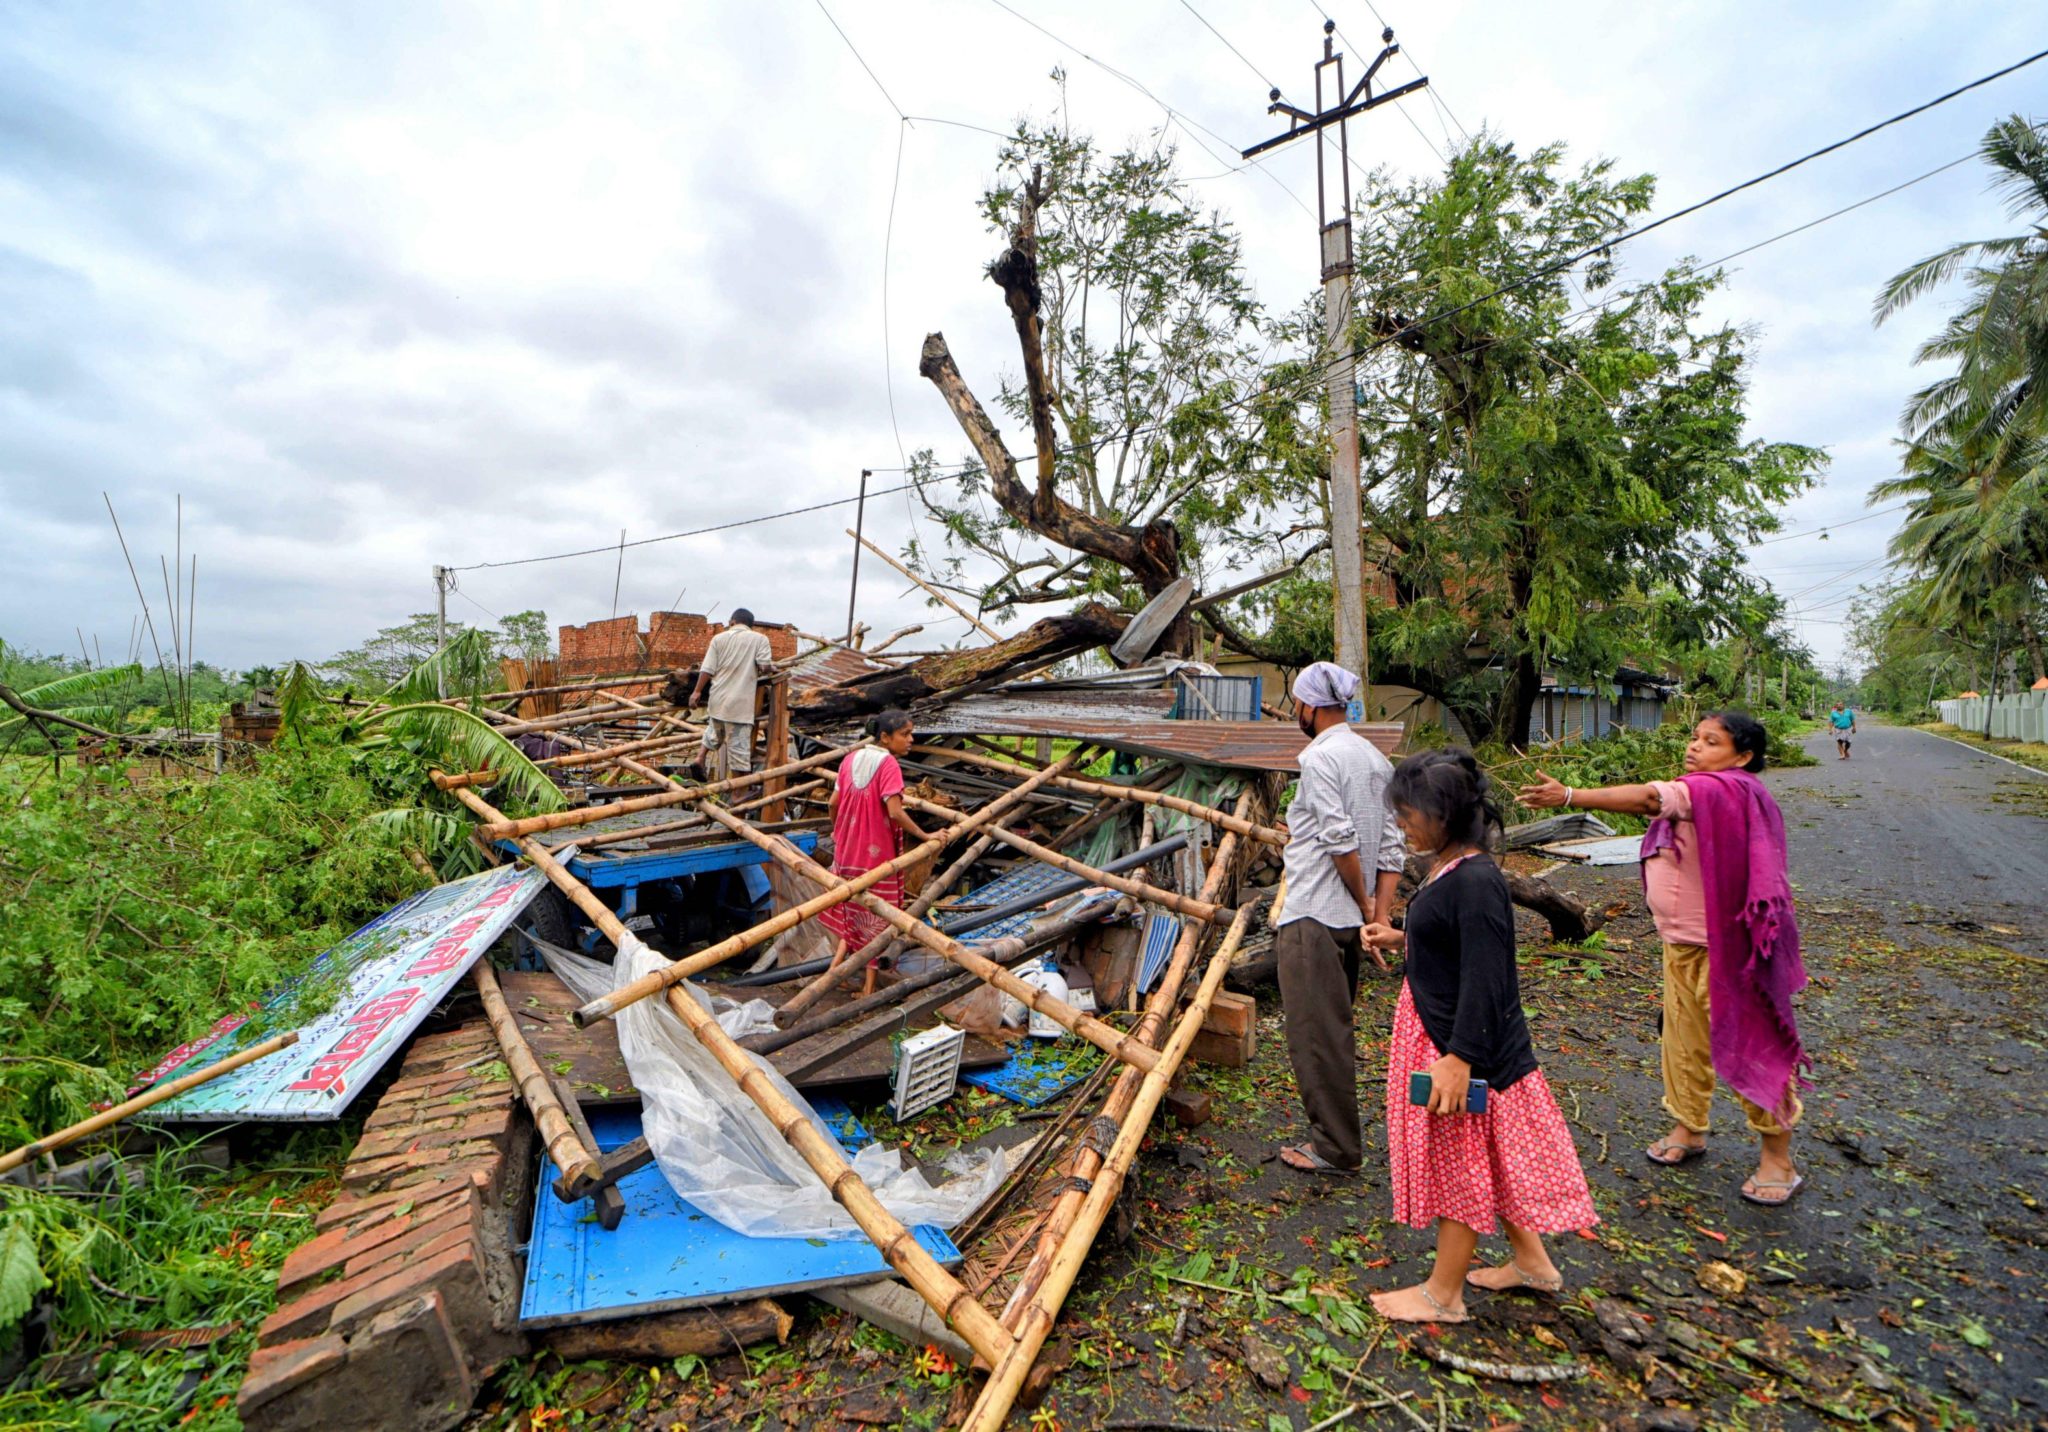 <p>A house completely devastated in the aftermath of Cyclone Amphan [image: Avishek Das / Alamy]</p>